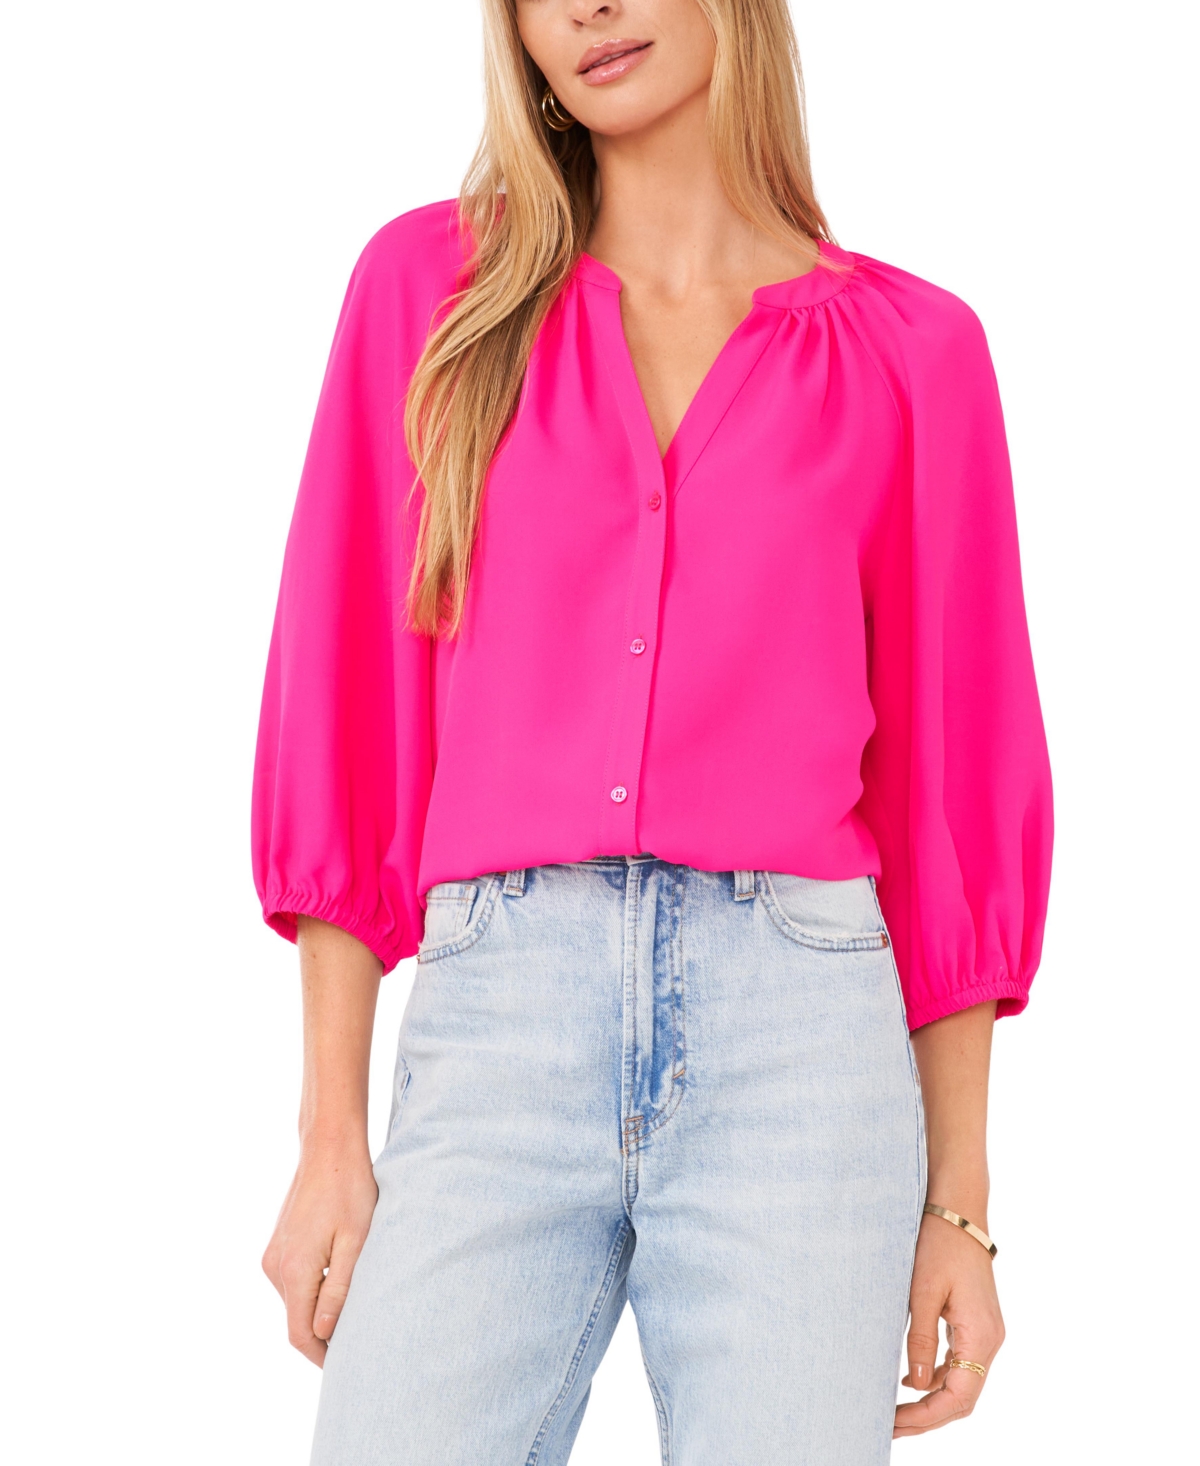 Women's Button Front 3/4-Puff Sleeve Top - Hot Pink